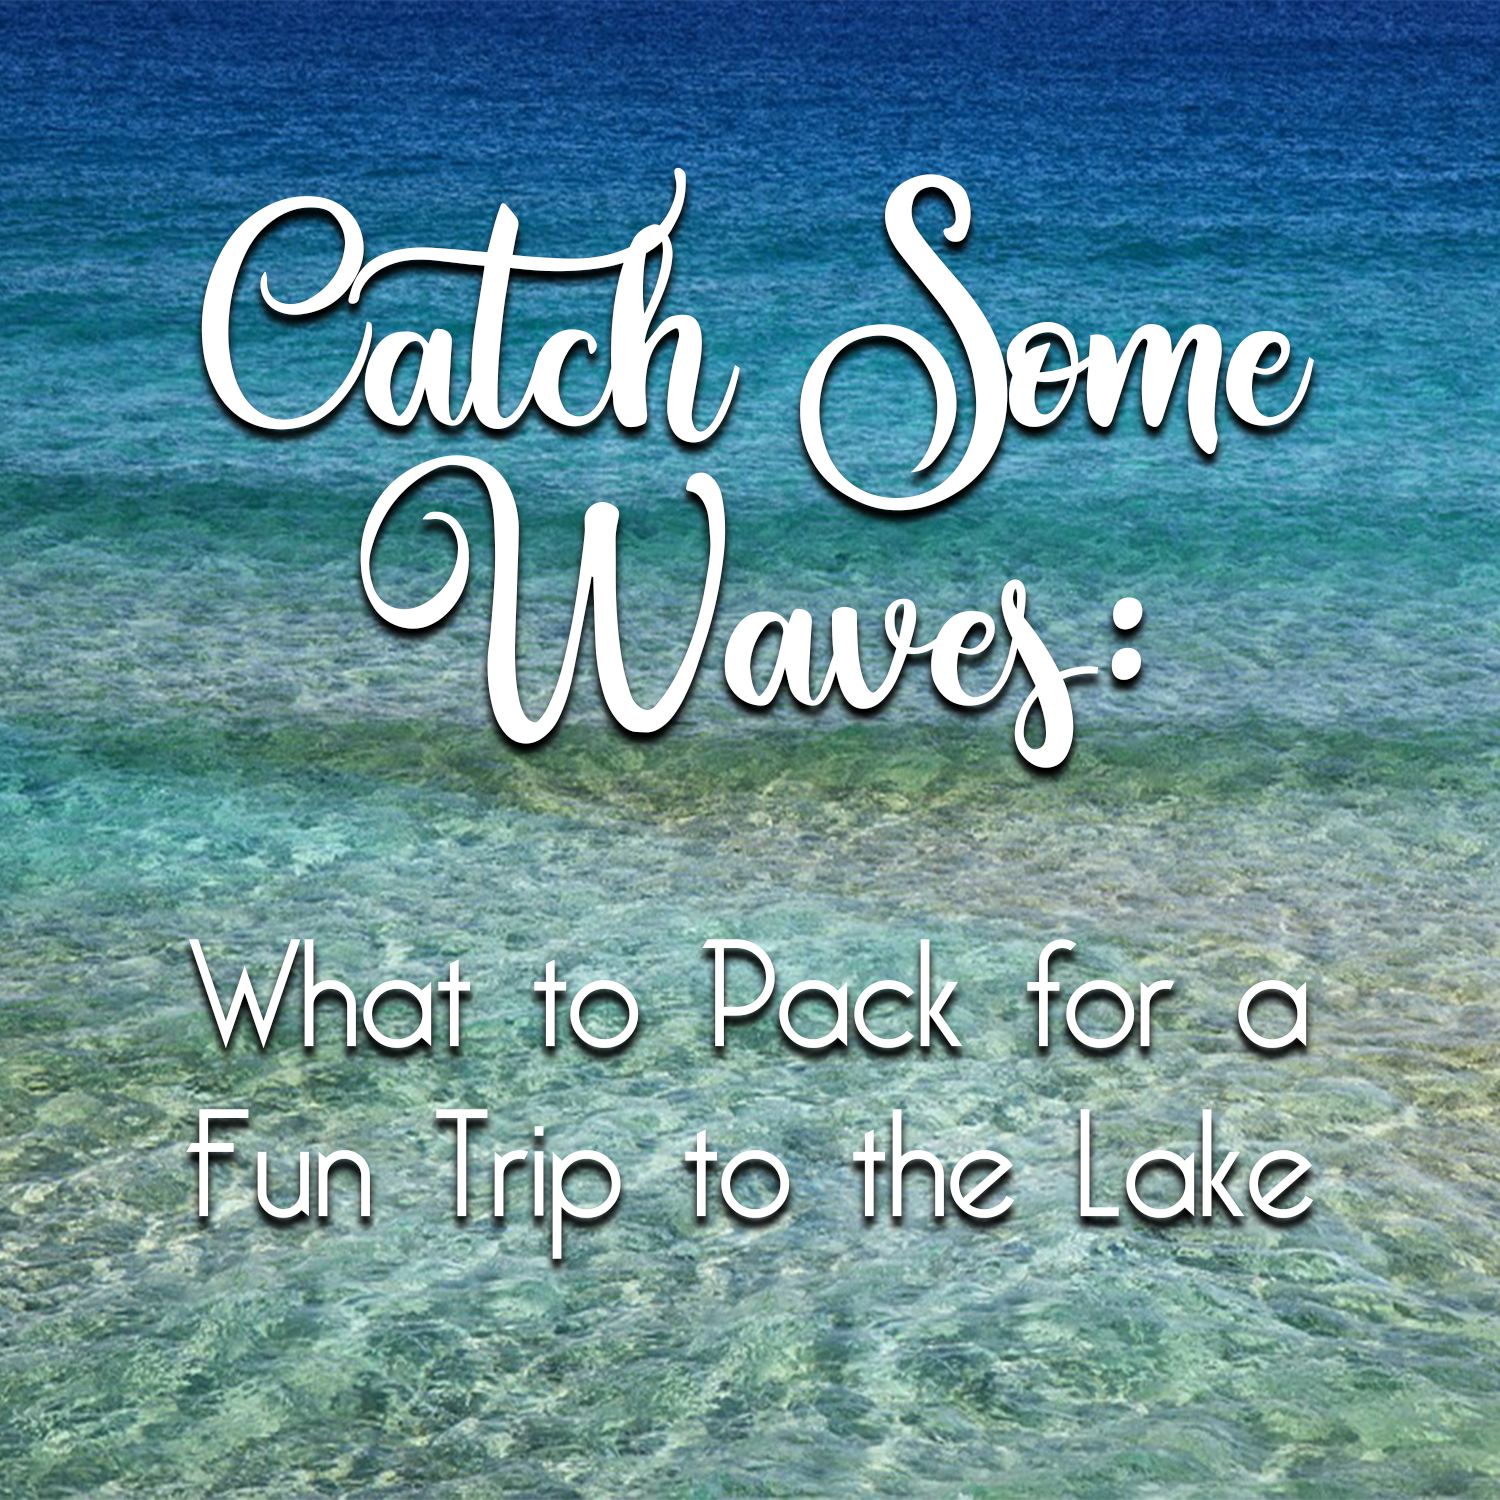 Catch some waves: what to pack for a fun trip to the lake